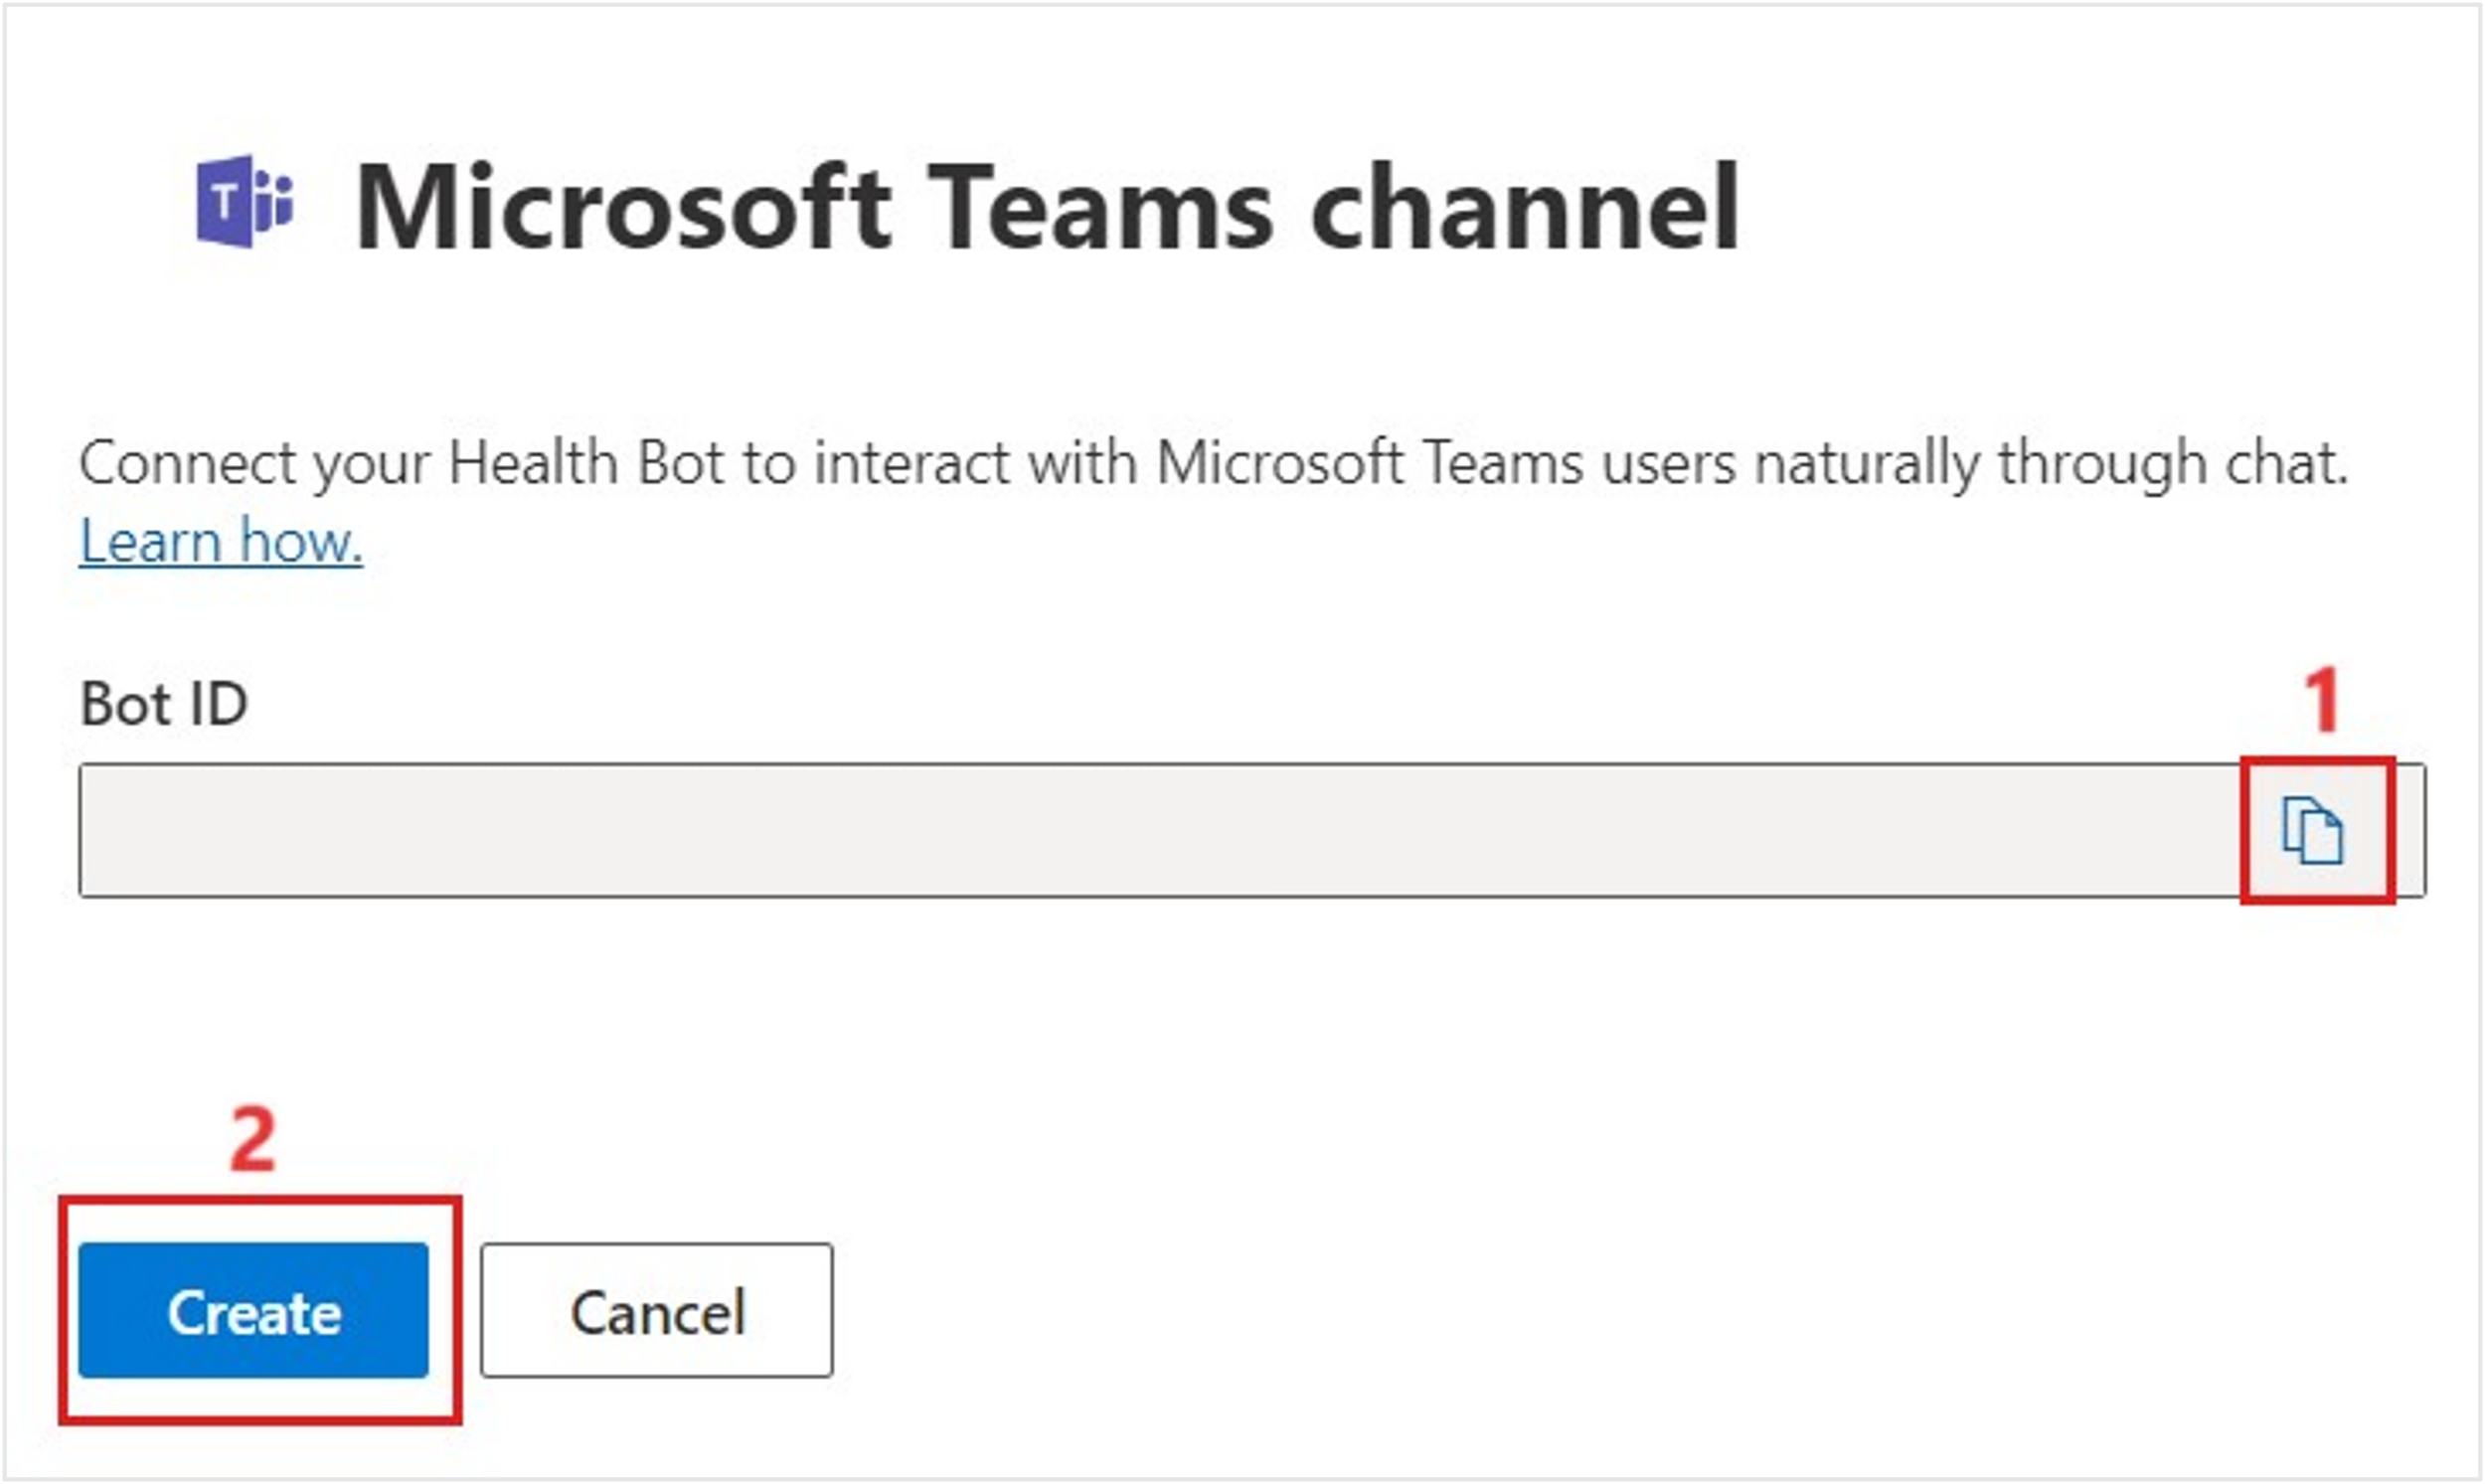 Screenshot of the Microsoft Teams channel window with the Bot ID and the Create button.